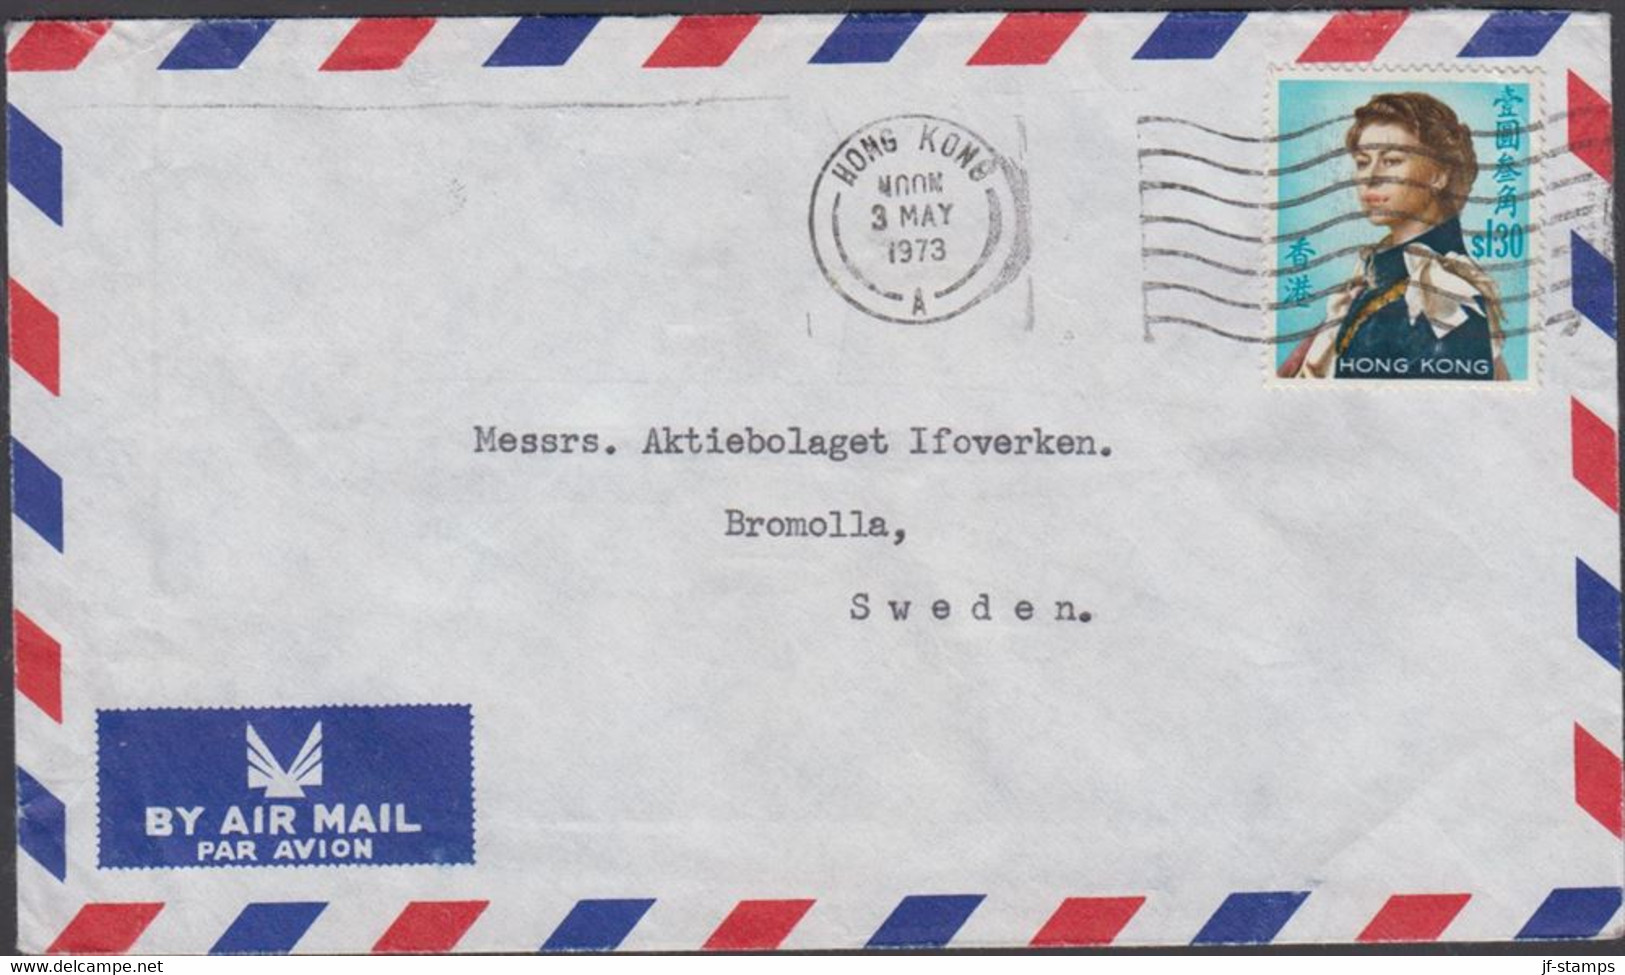 1973. HONG KONG. Elizabeth $ 1.30 On AIR MAIL Cover To Bromolla, Sweden From HONG KONG 3 MAY ... (Michel 206) - JF427083 - Briefe U. Dokumente